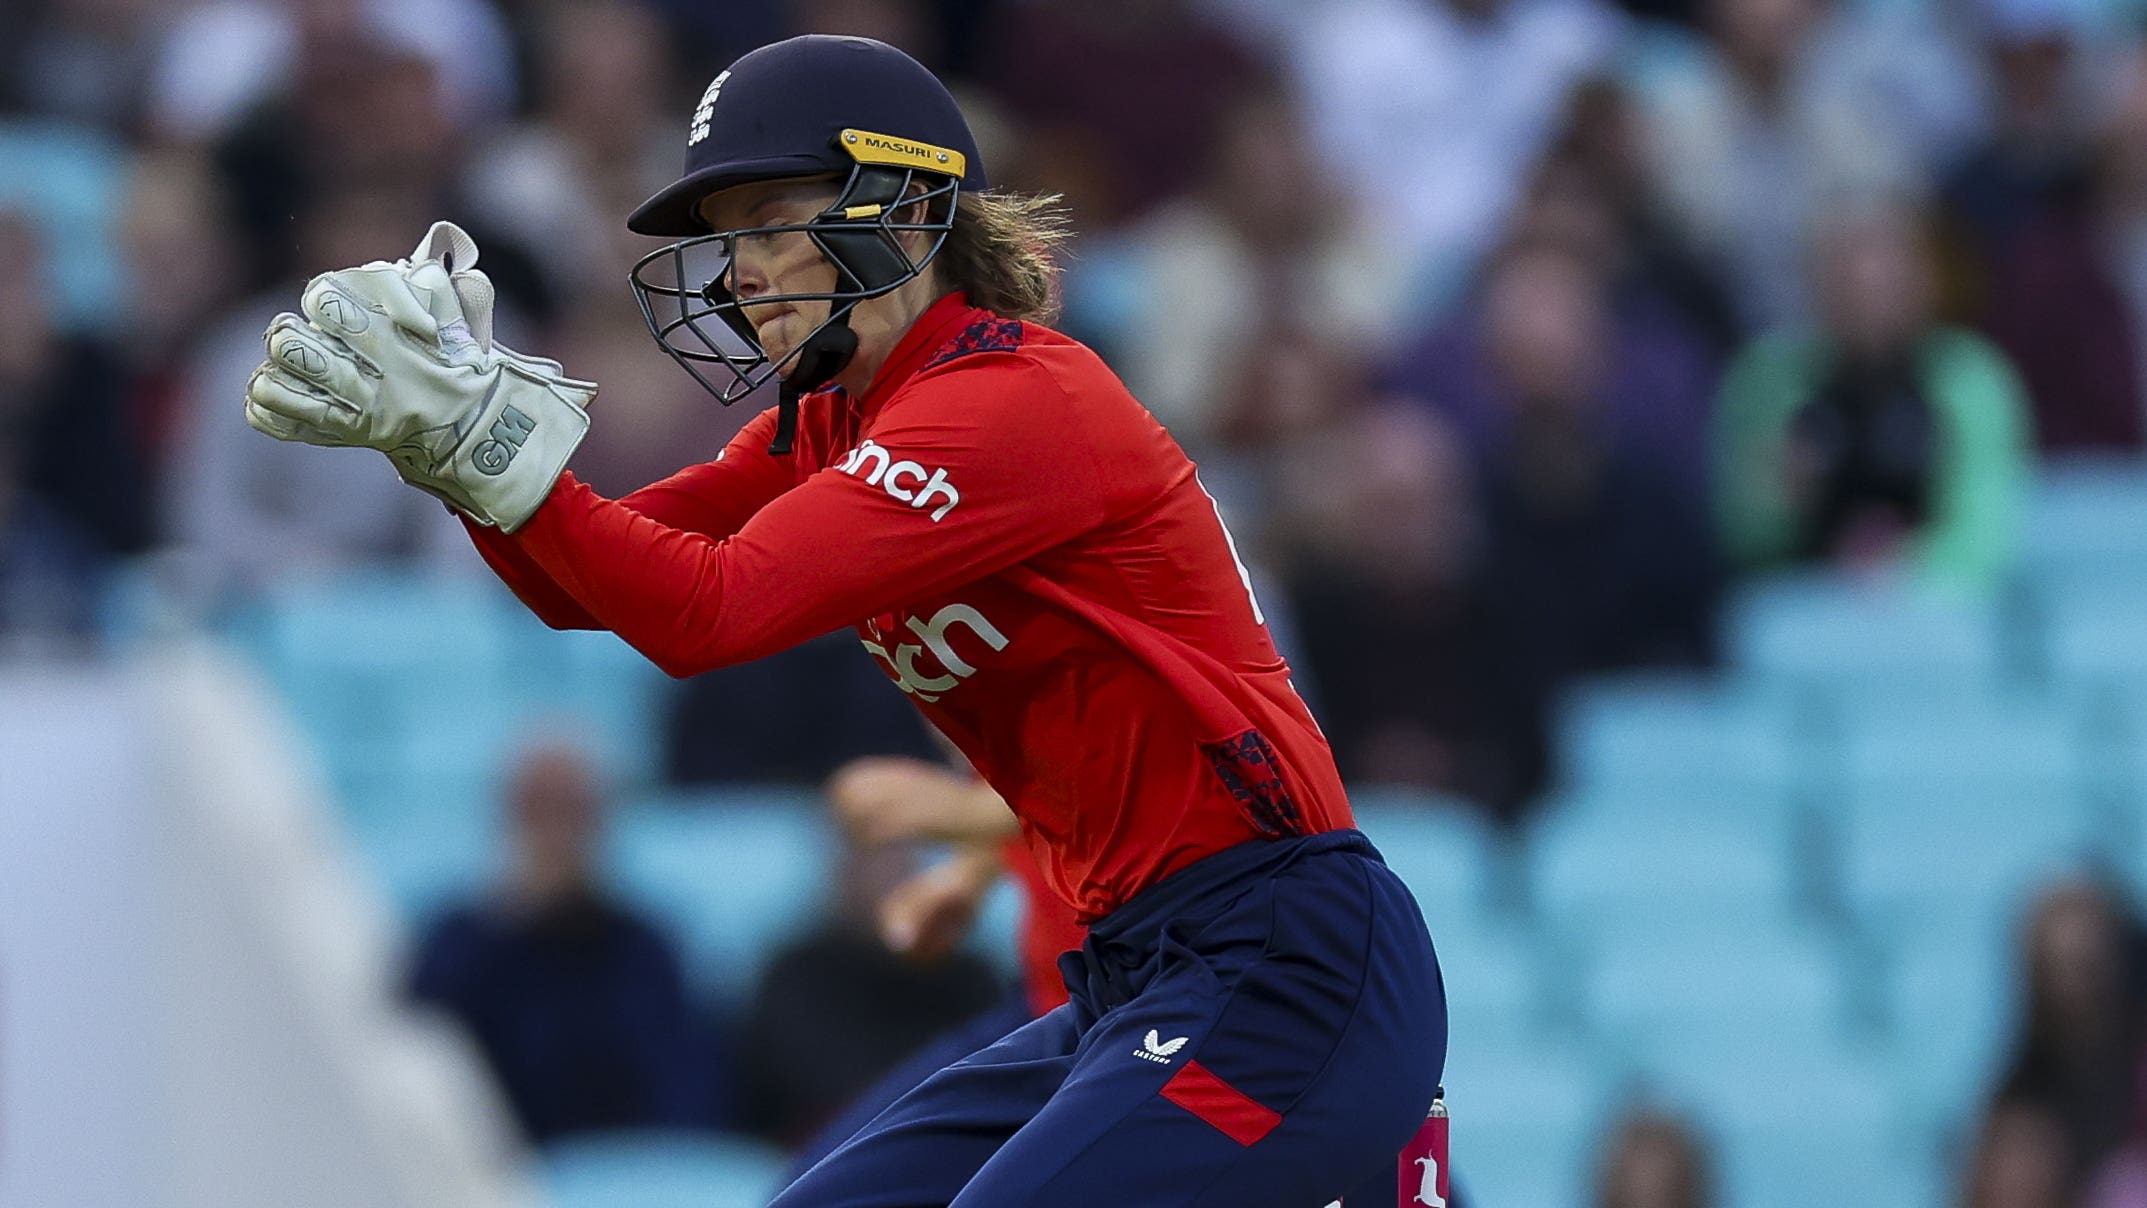 Amy Jones expects ‘tricky’ task behind stumps during T20 World Cup in Bangladesh